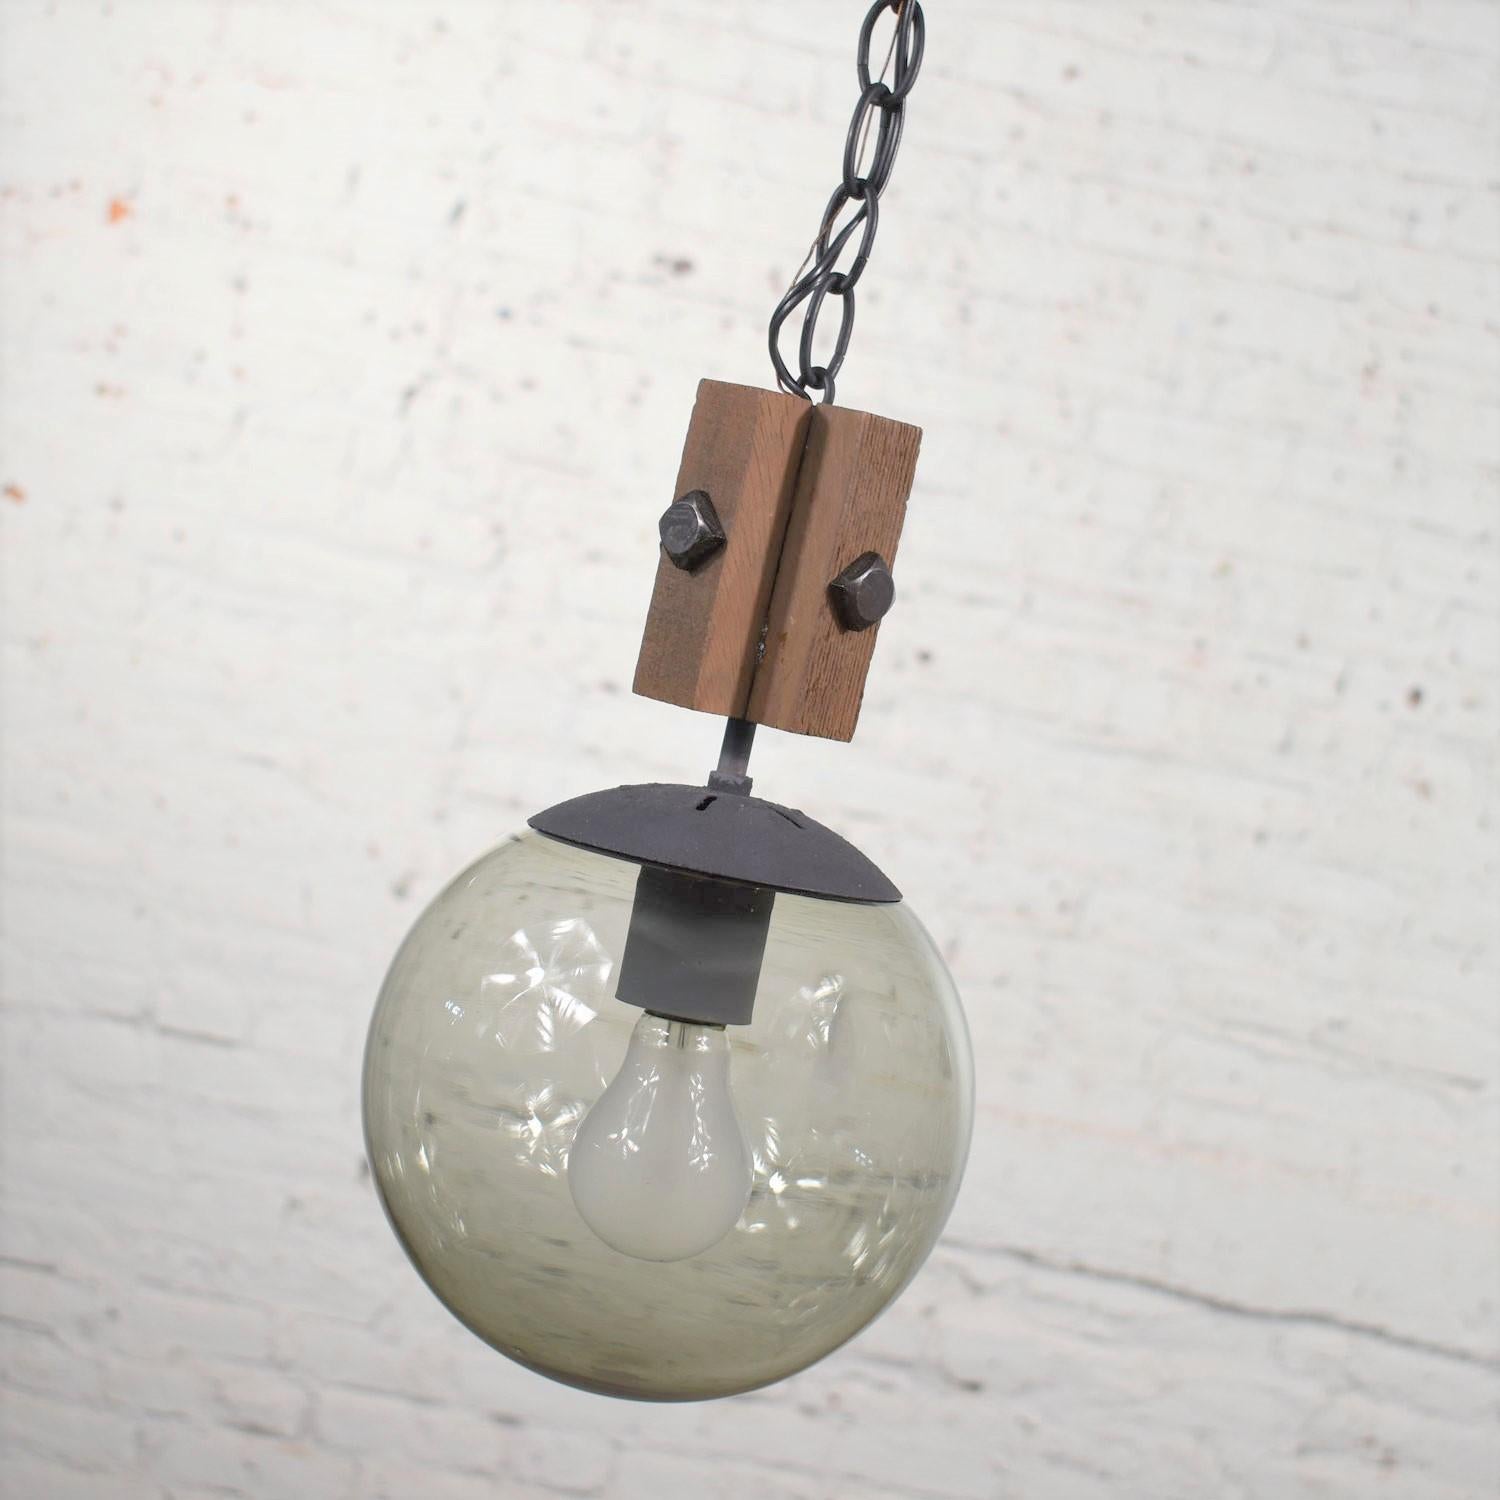 Handsome Mid-Century Modern NOS (new old stock) slightly Brutalist or rustic black, wood, and smoked glass globe pendant light with black chain and canopy. It is made by Lighting-Accessories, Inc. a Hamilton Cosco company. It is in wonderful vintage